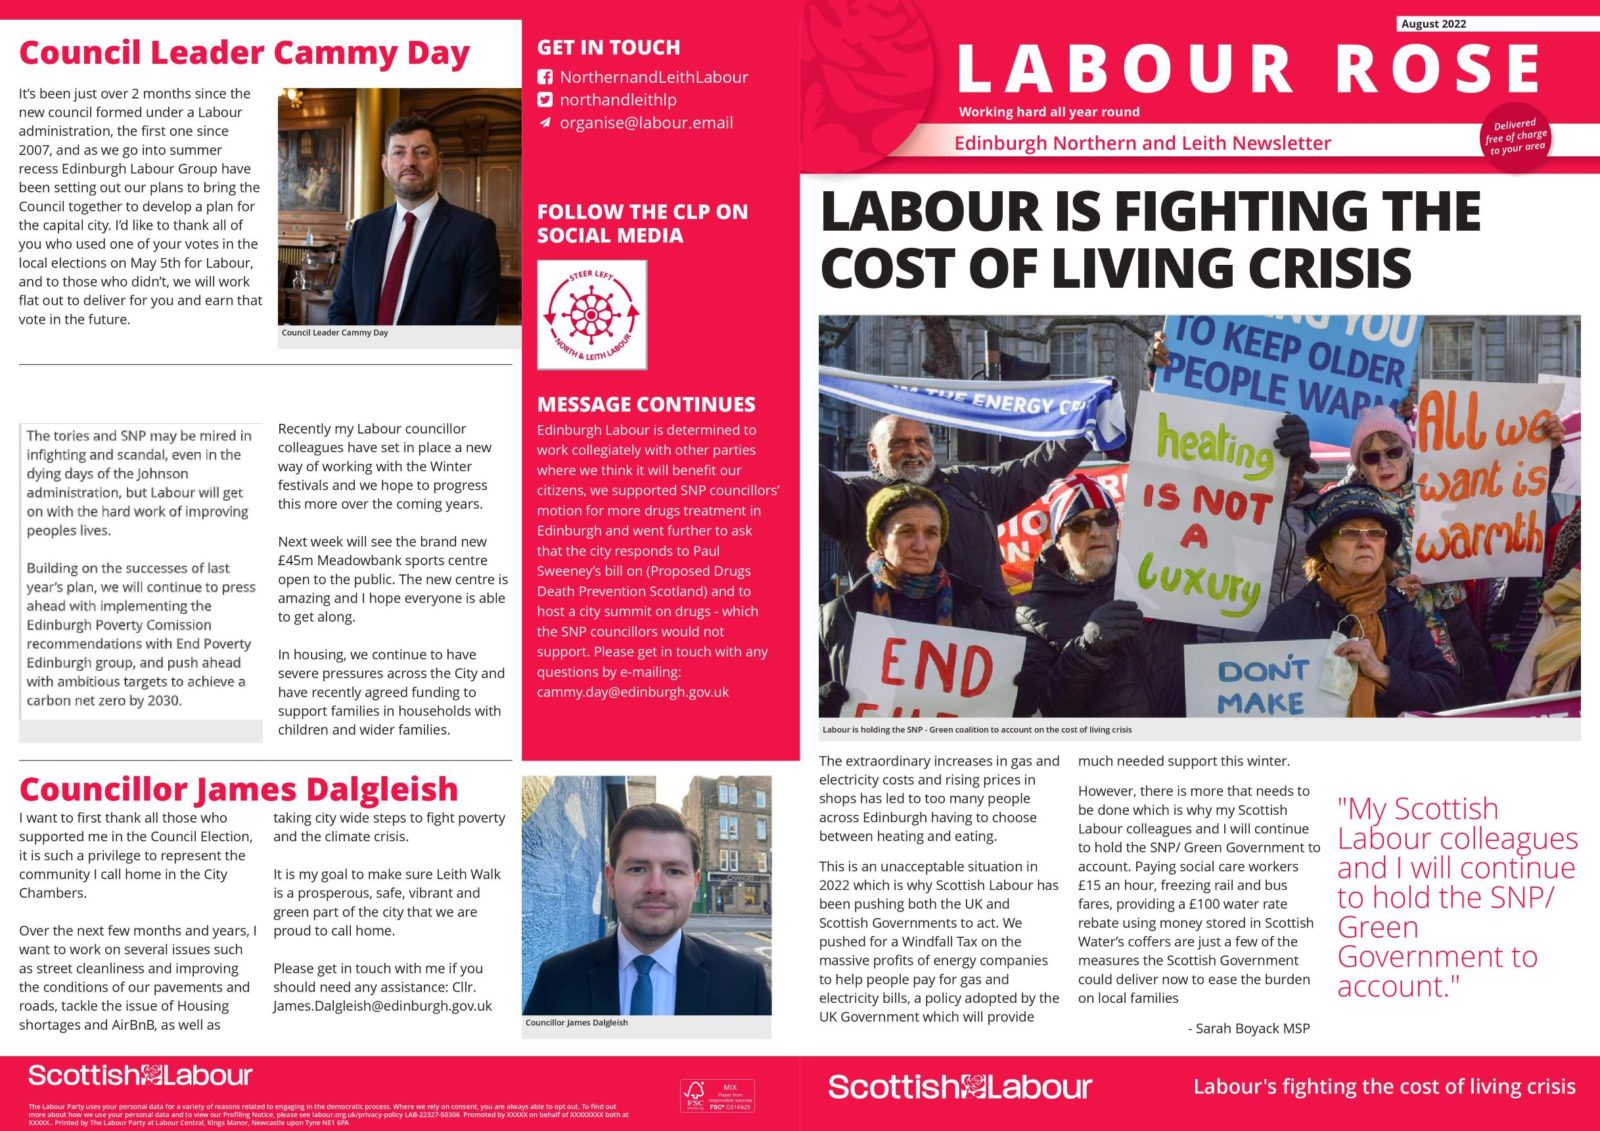 Edinburgh Northern and Leith Newsletter - August 2022 - Page 1